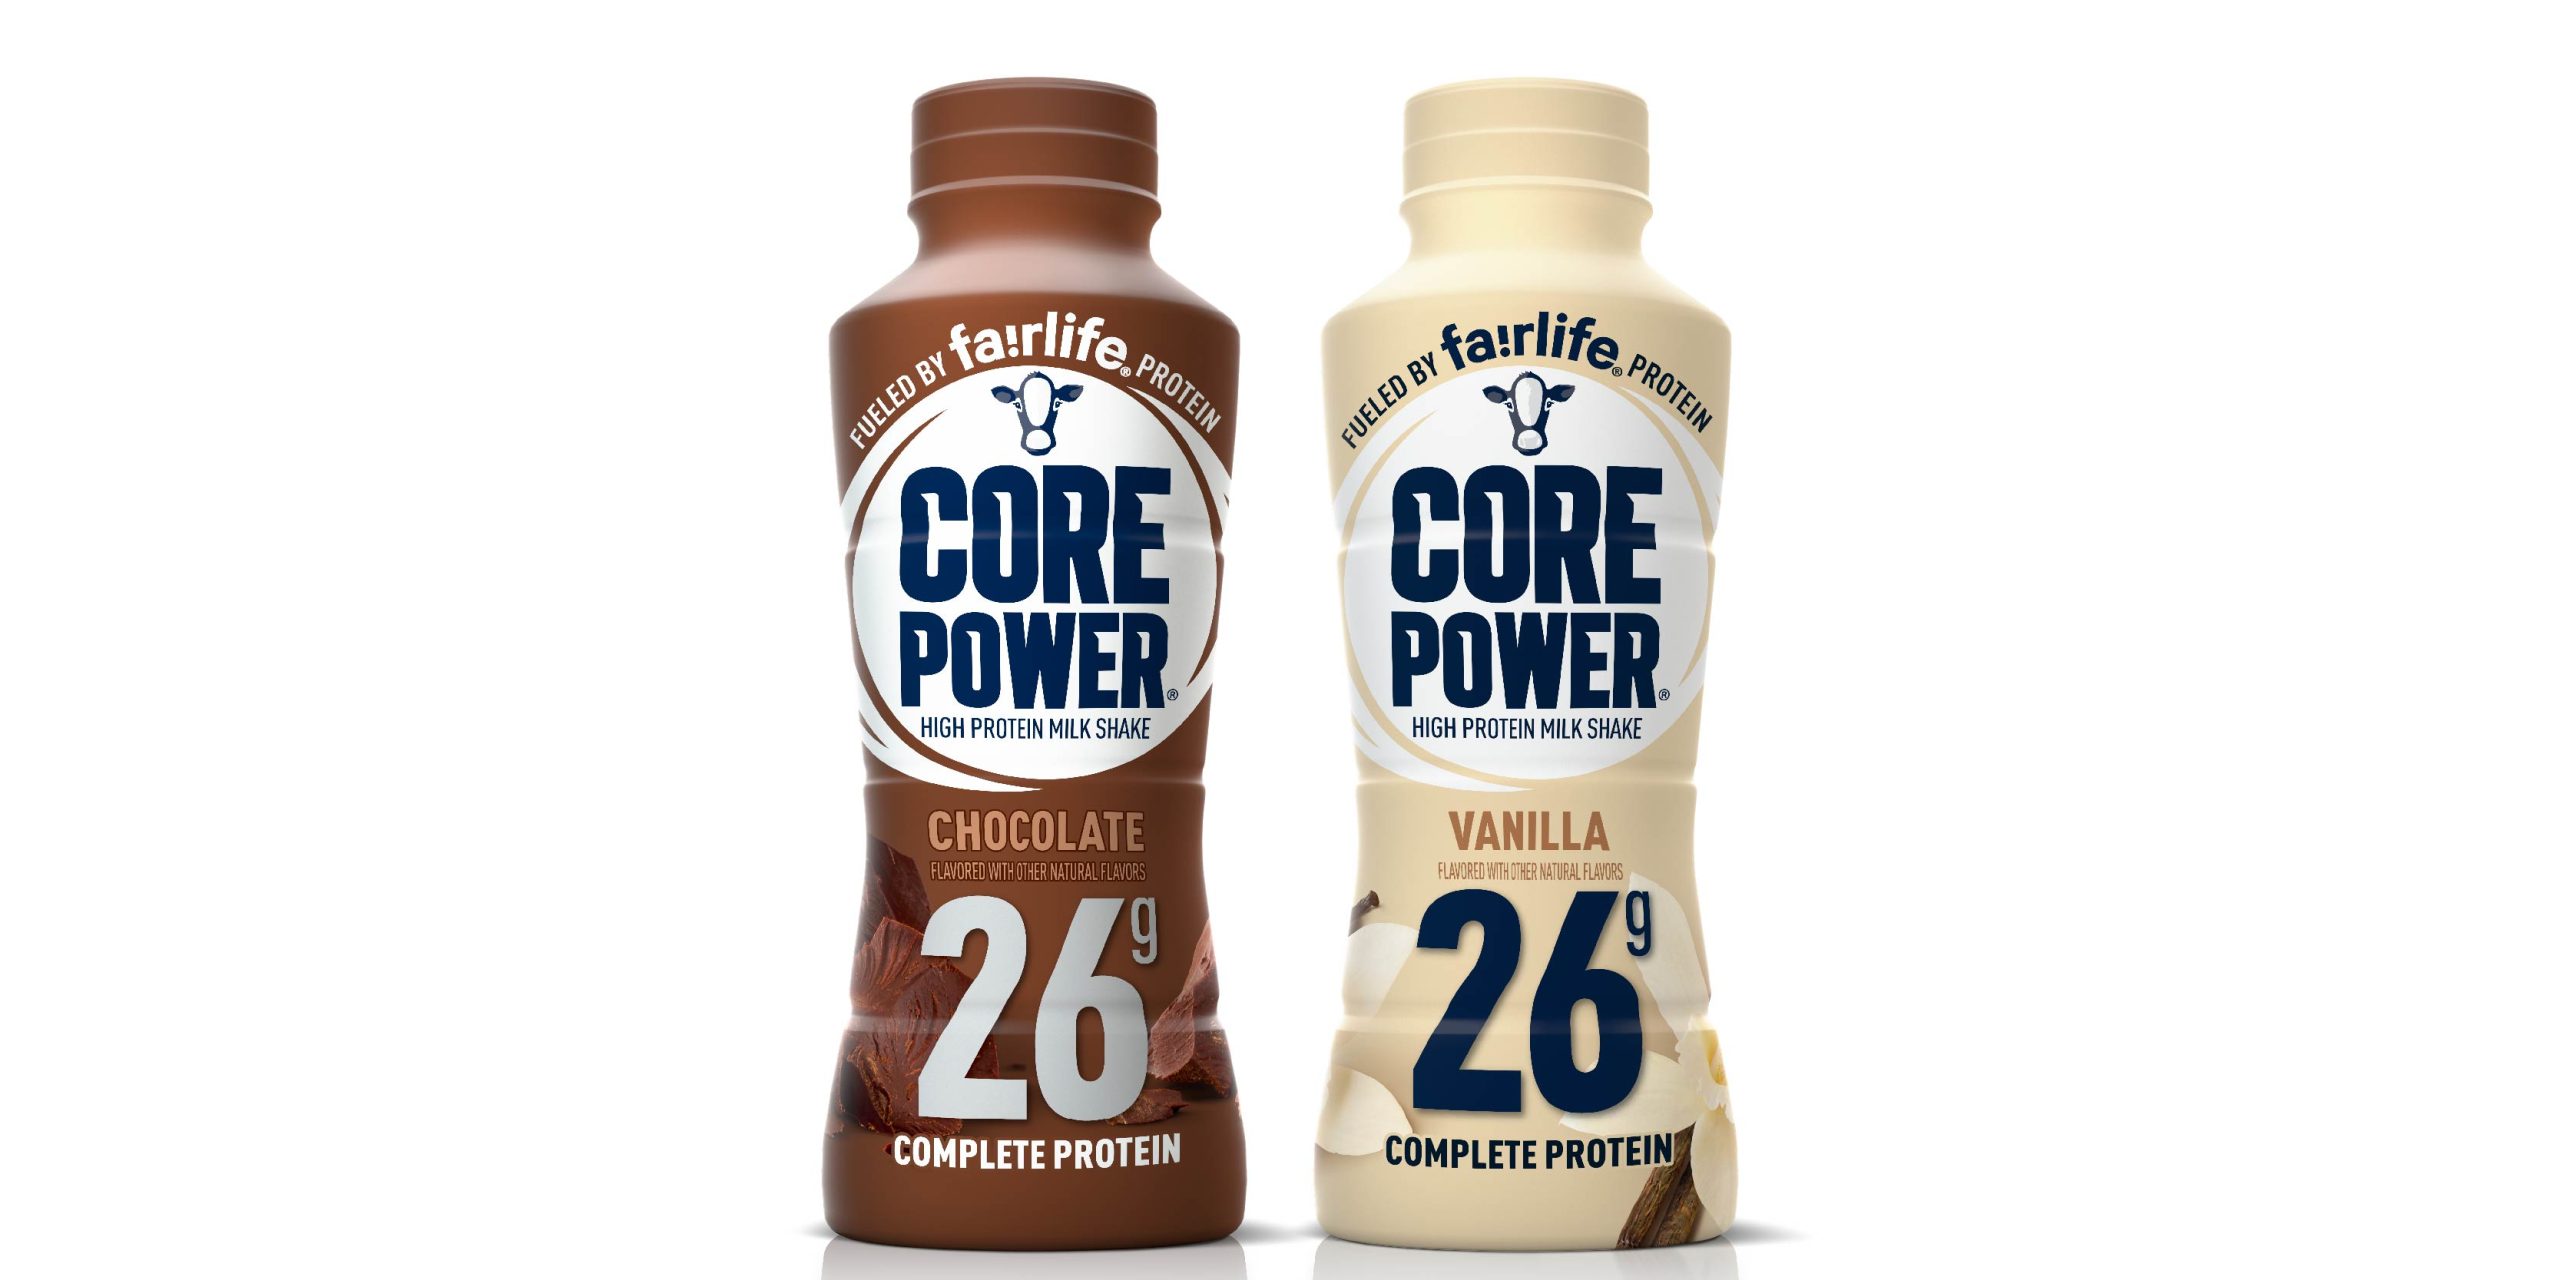 5-23015 CCBG-Core Power Protein Shakes Assets- Coke Digital Assets_Product Image-800x400